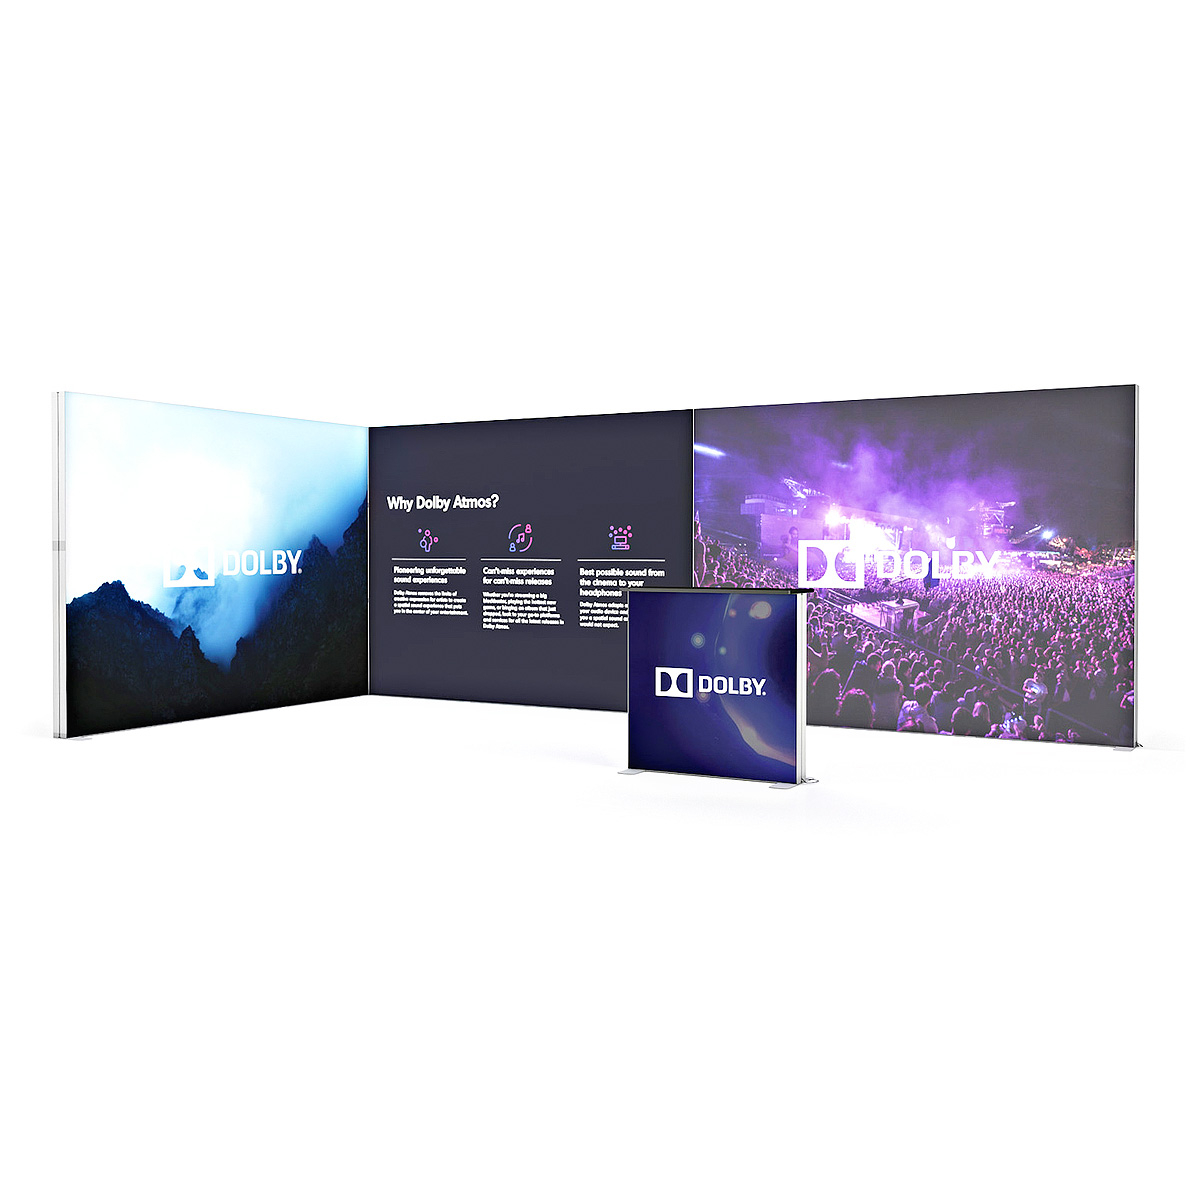 FABRILUX® 6x3 LED Lightbox Fabric Exhibition Stand Kit 25